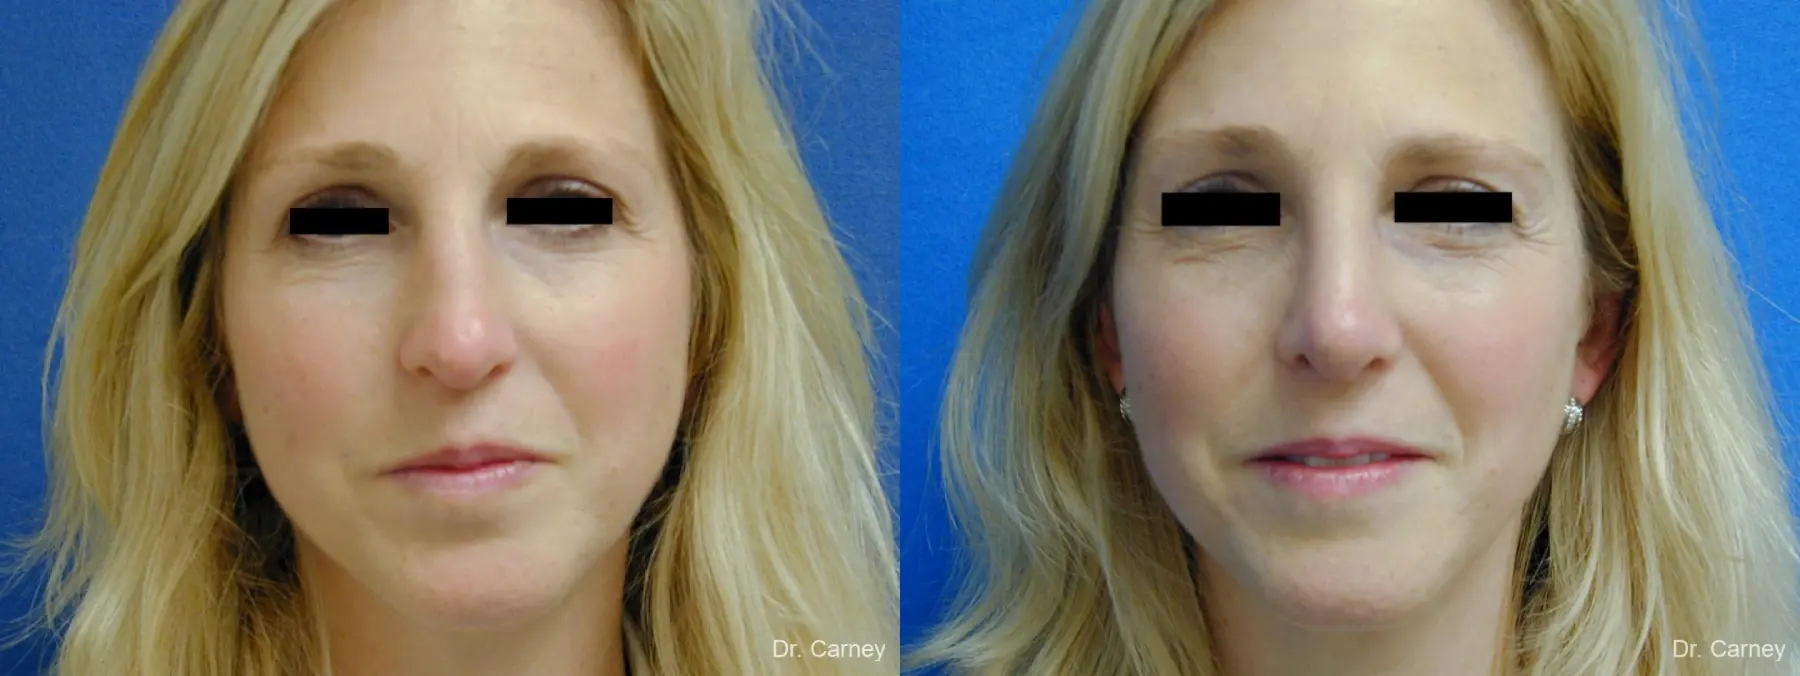 Virginia Beach Rhinoplasty 1343 - Before and After 1